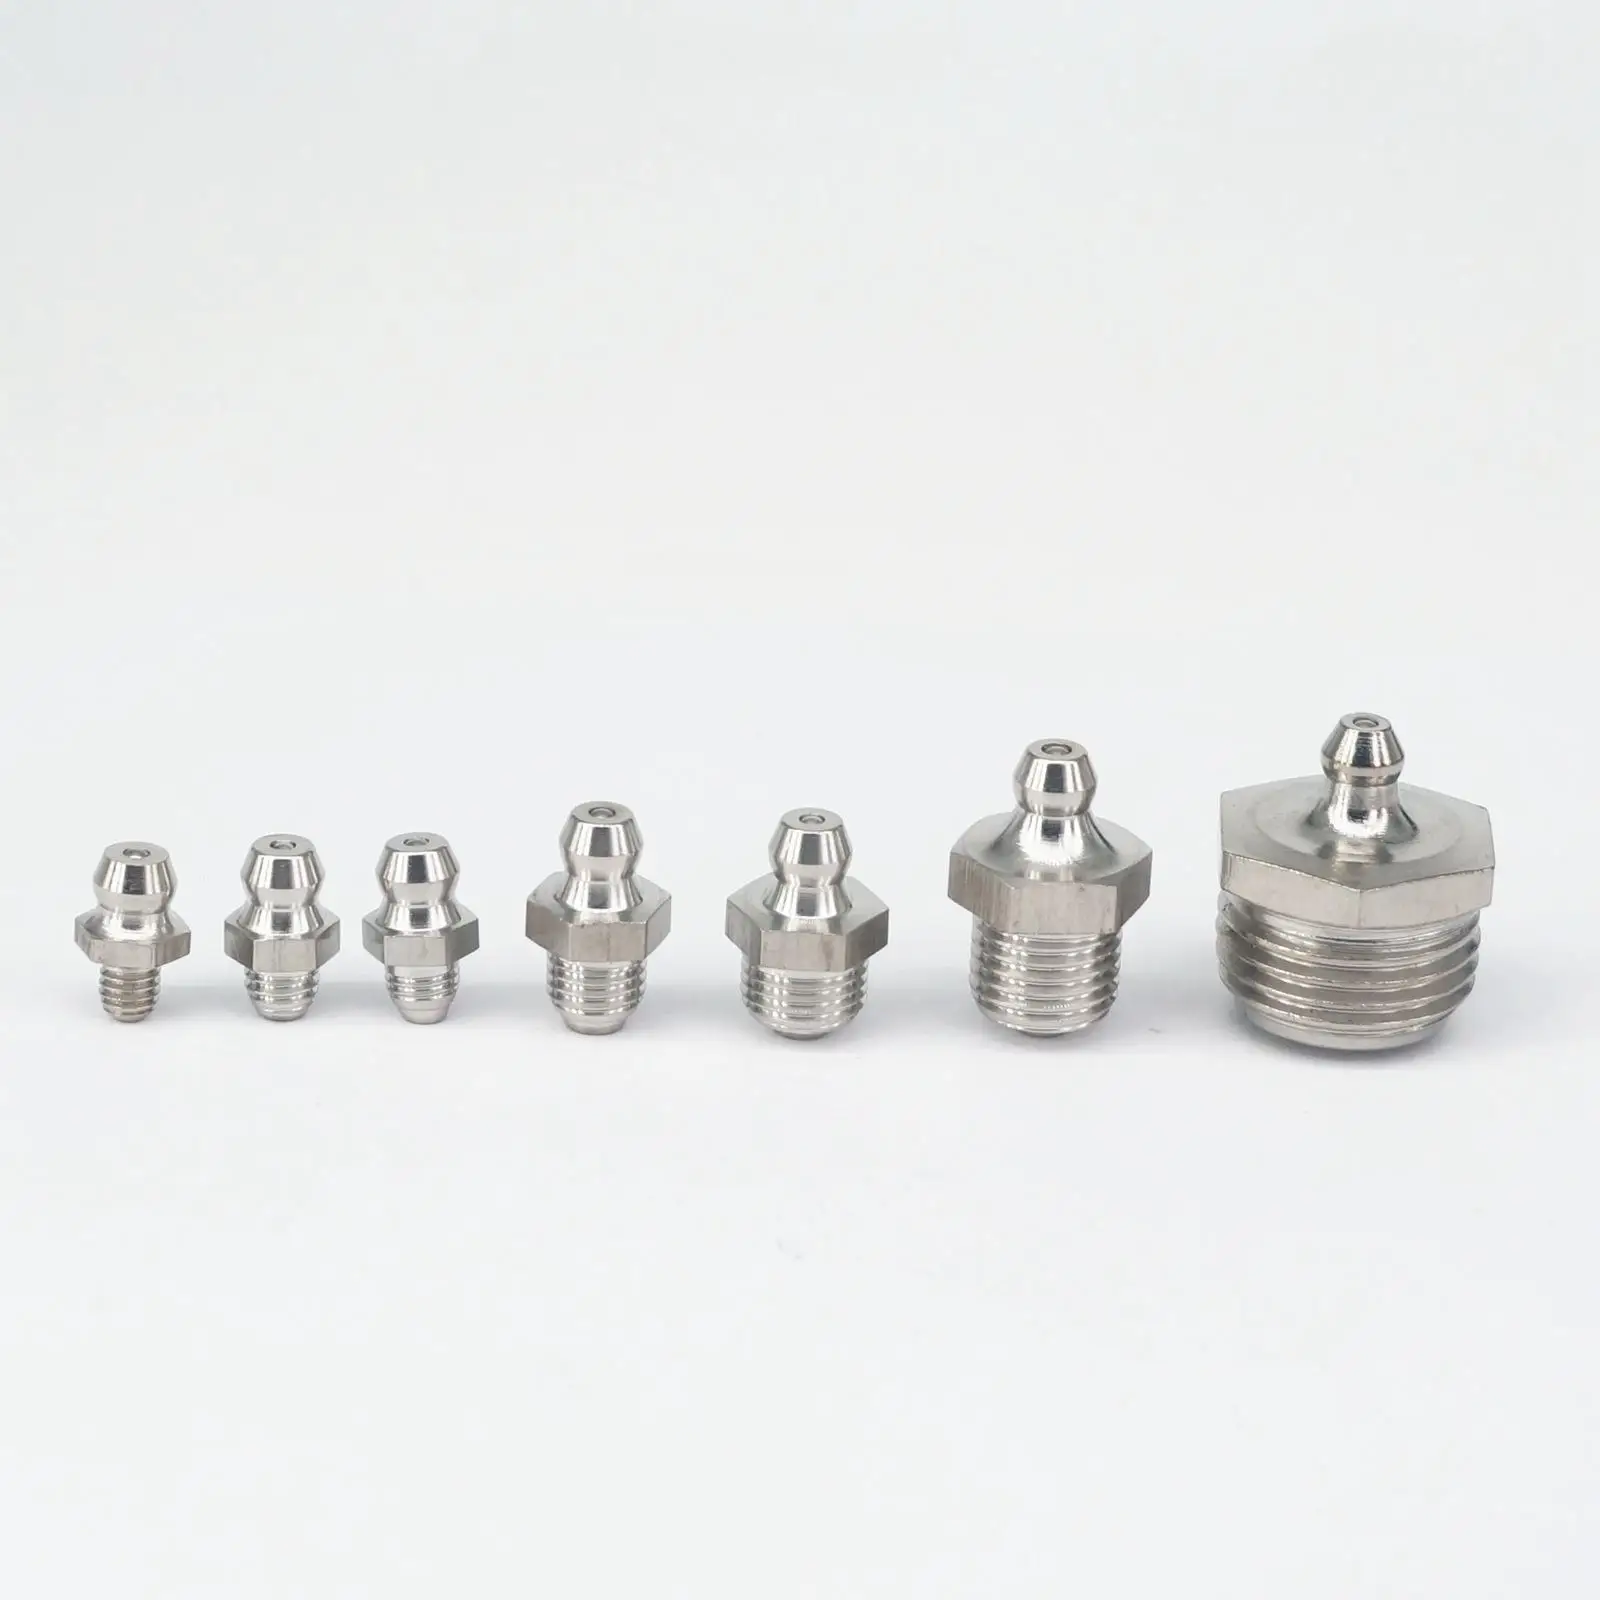 

(2) M5 M6 M8 M10 M12 M14 M16 M20 Metric Thread Male 304 Stainless Steel Grease Zerk Nipple Fitting For Grease Gun